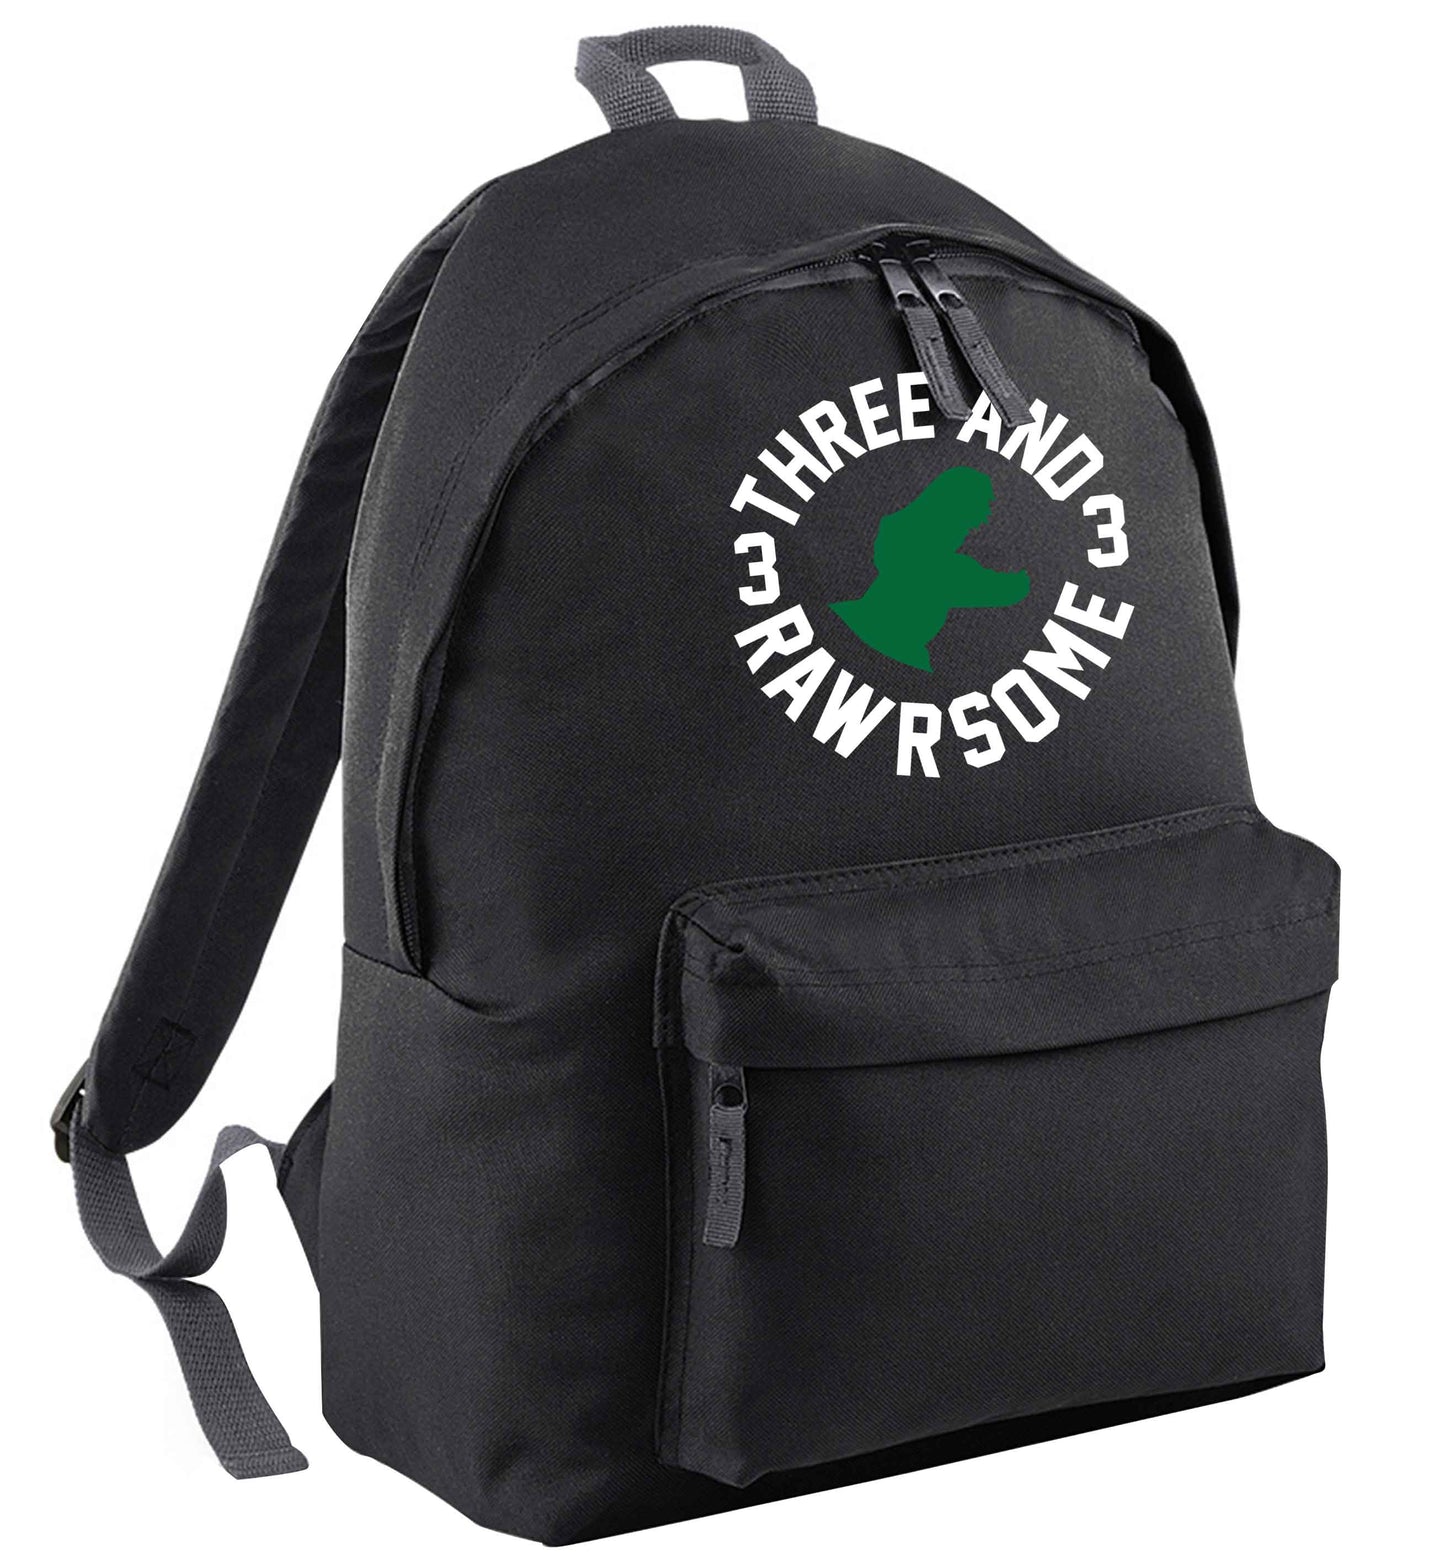 Three and rawrsome | Adults backpack